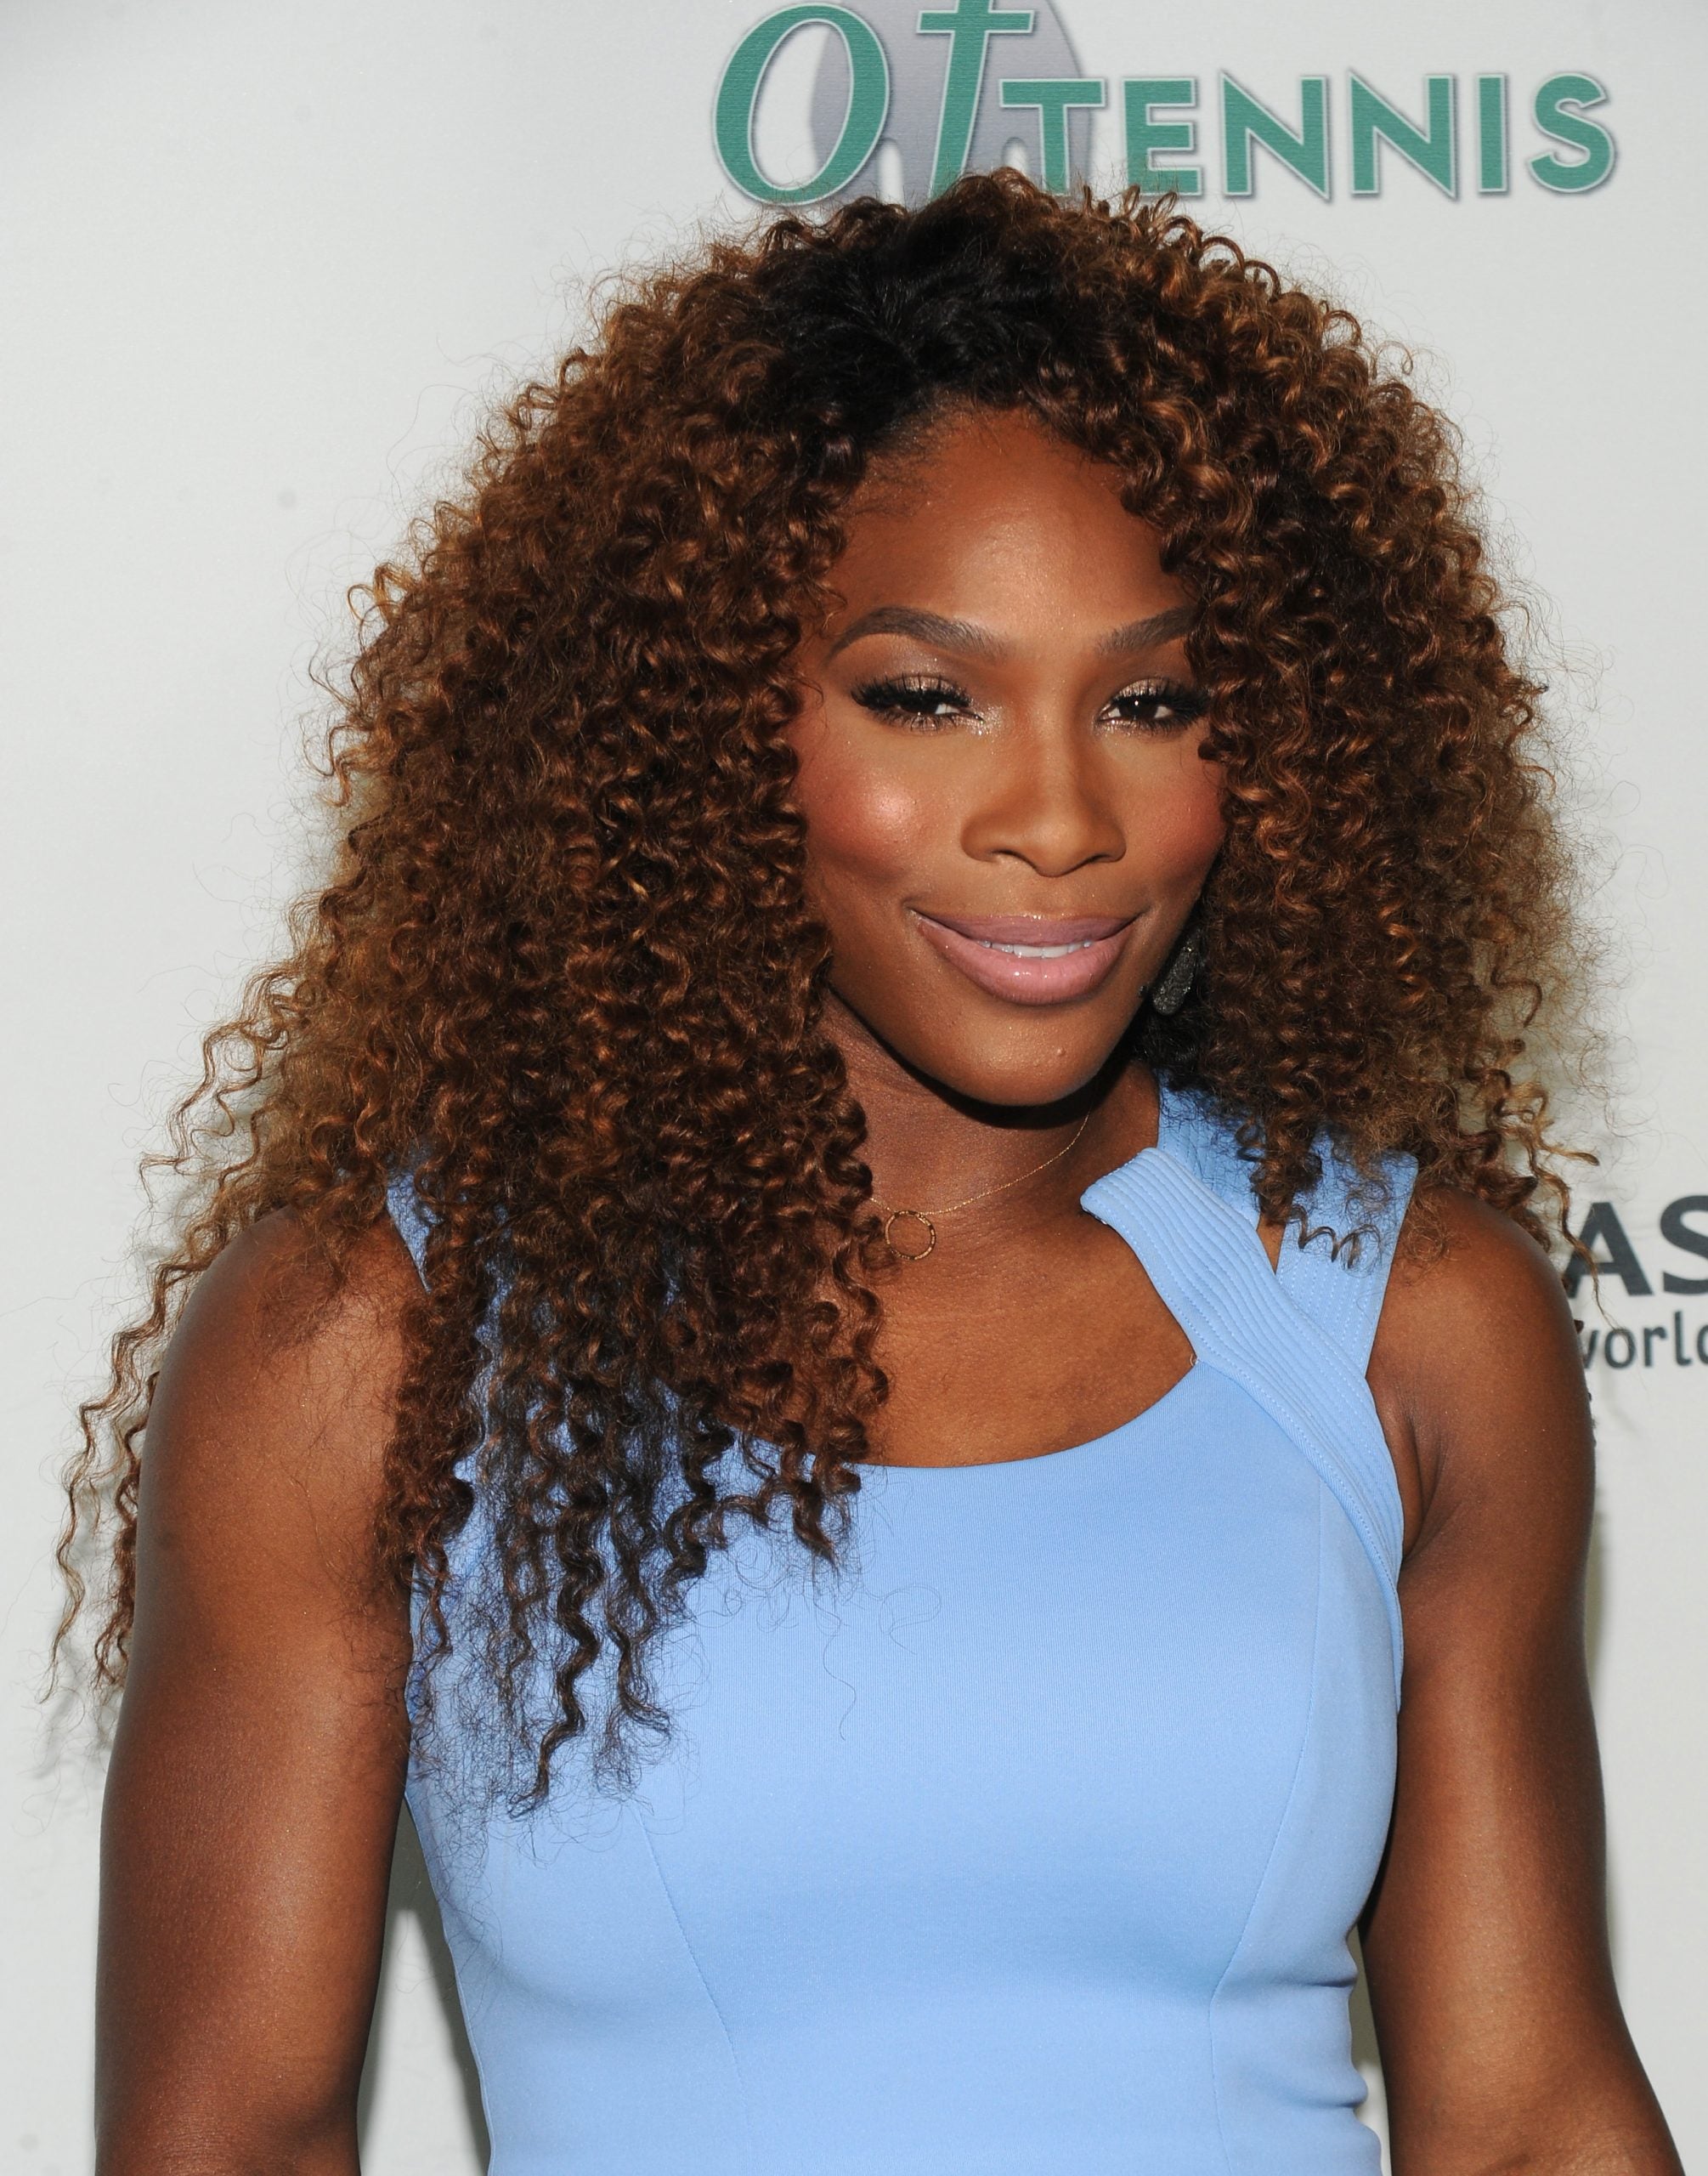 42 Of Serena Williams’ Most Iconic Beauty Looks 

